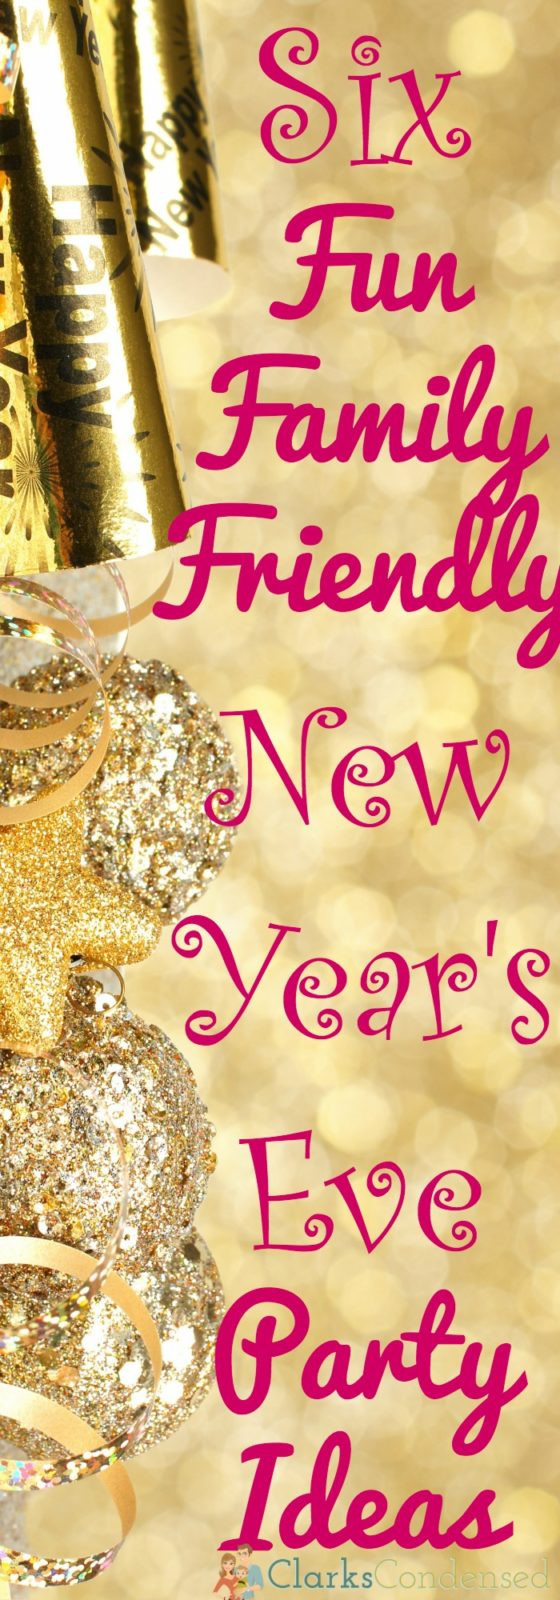 New Year Ideas
 Family Friendly New Year s Eve Parties Ideas